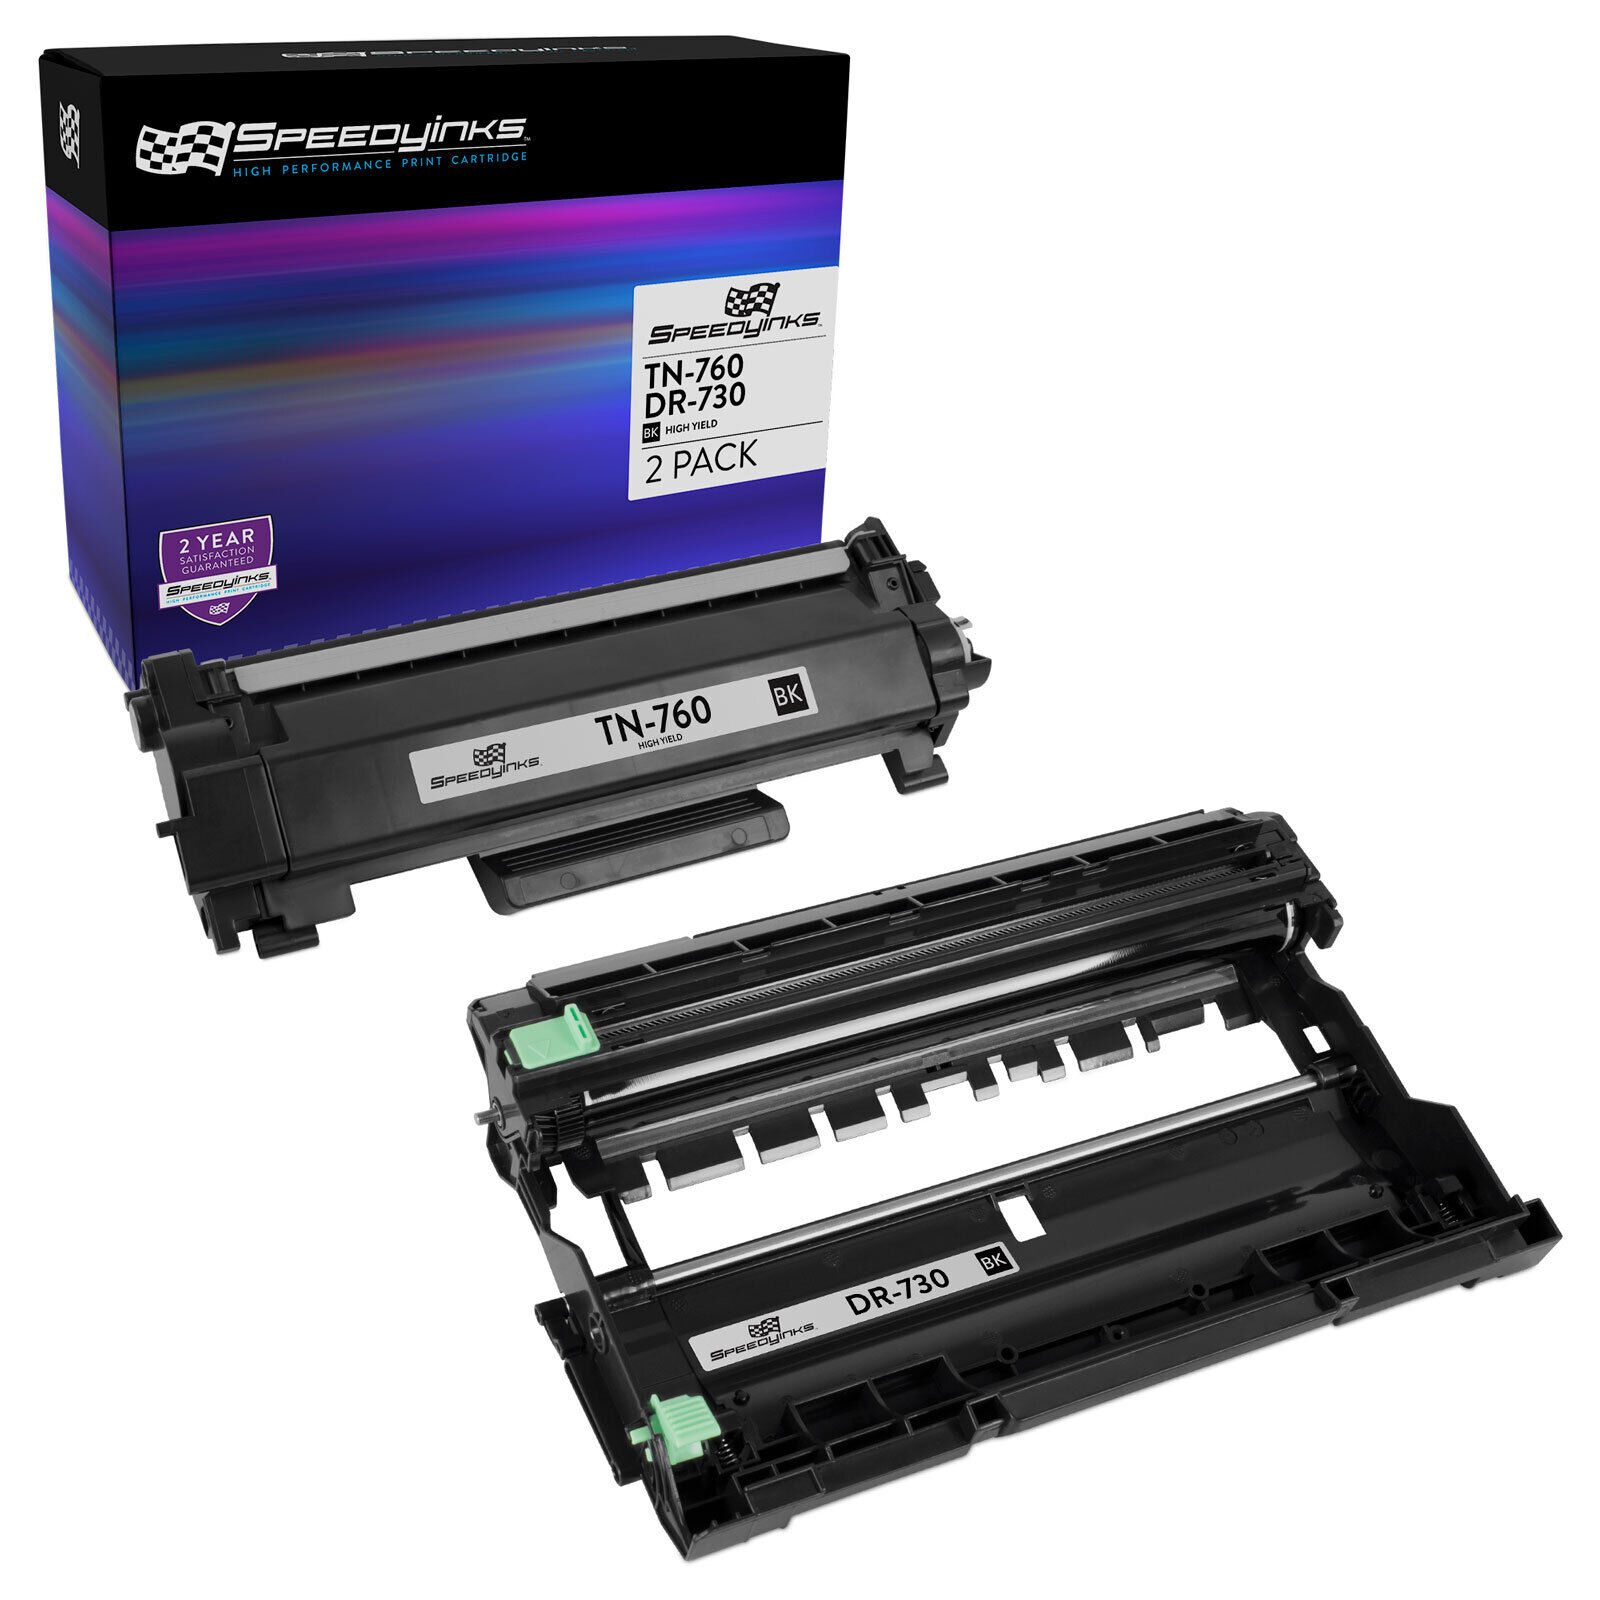 SPEEDYINKS 2PK Replacements for Brother TN760 Black Toner Cartridge & DR730 Drum